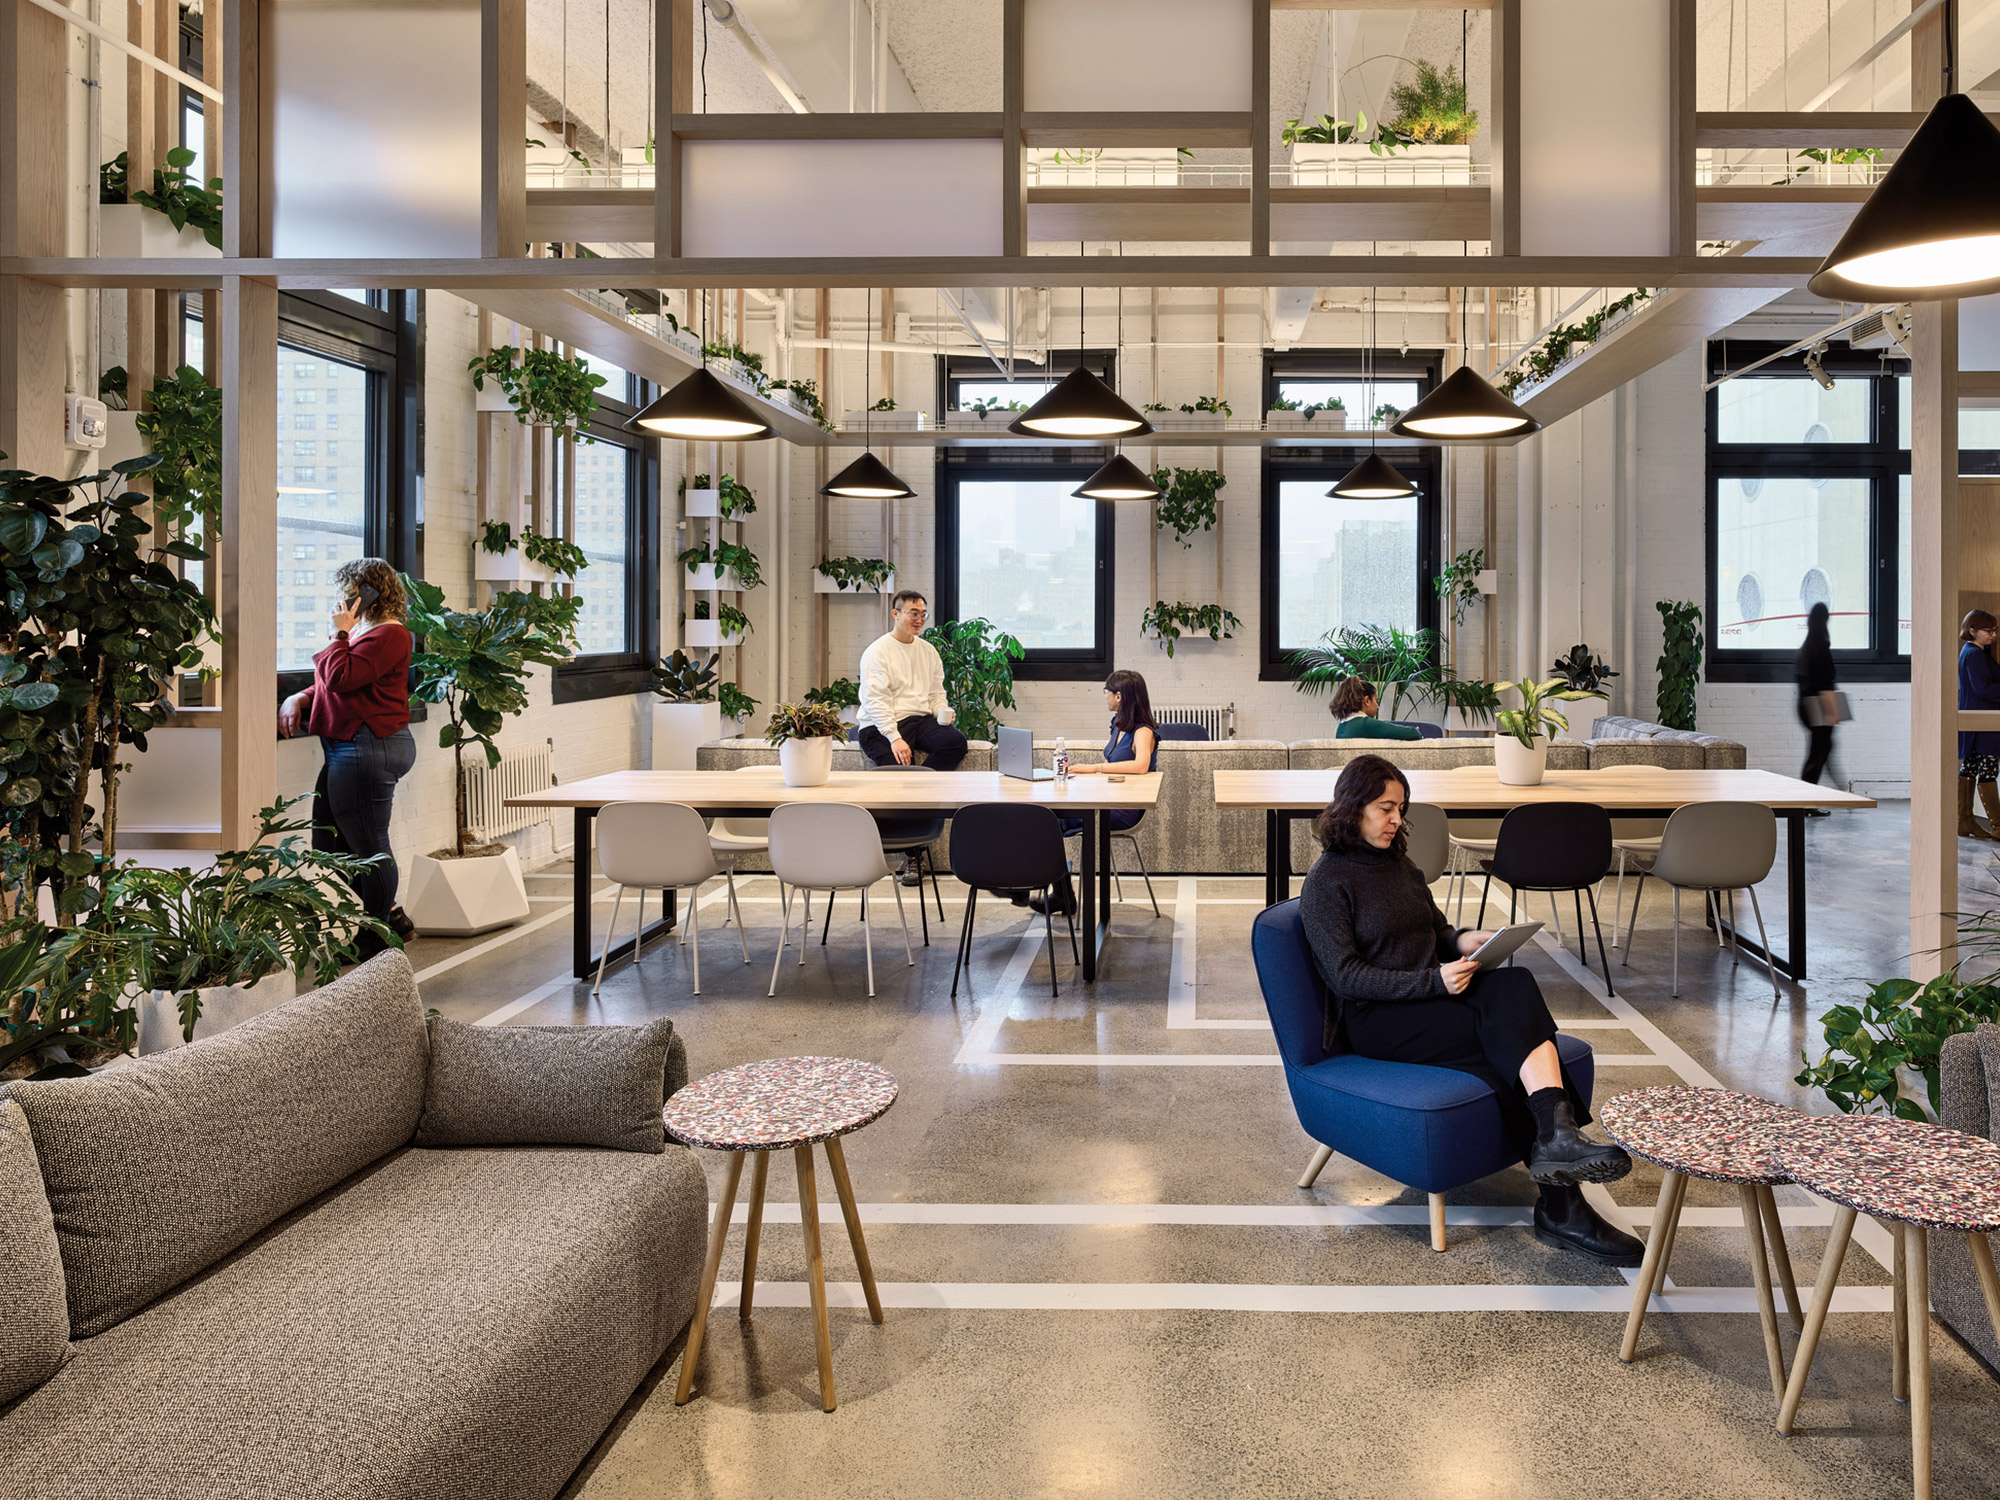 Interior, open plan office space with lots of lush green plants